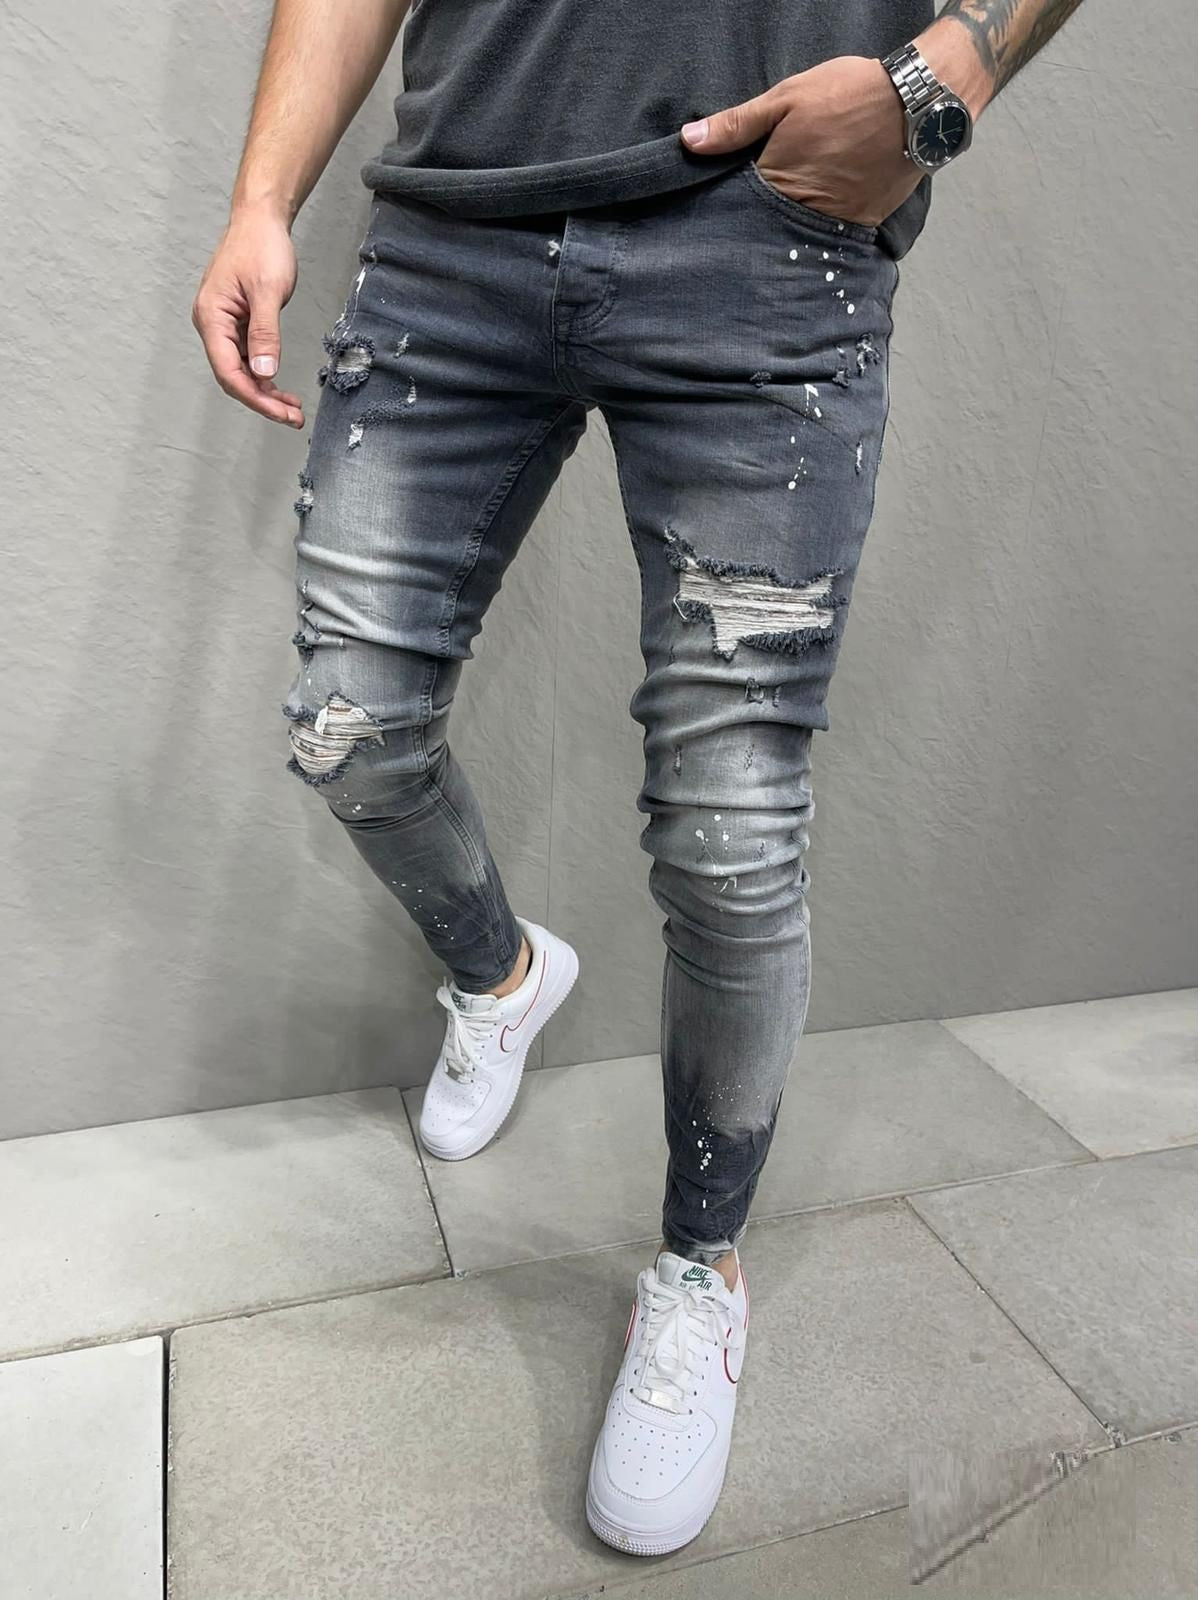 Men Cotton Ripped Washed Jeans | Ripped jeans men, Jeans outfit men, Ripped  jeans